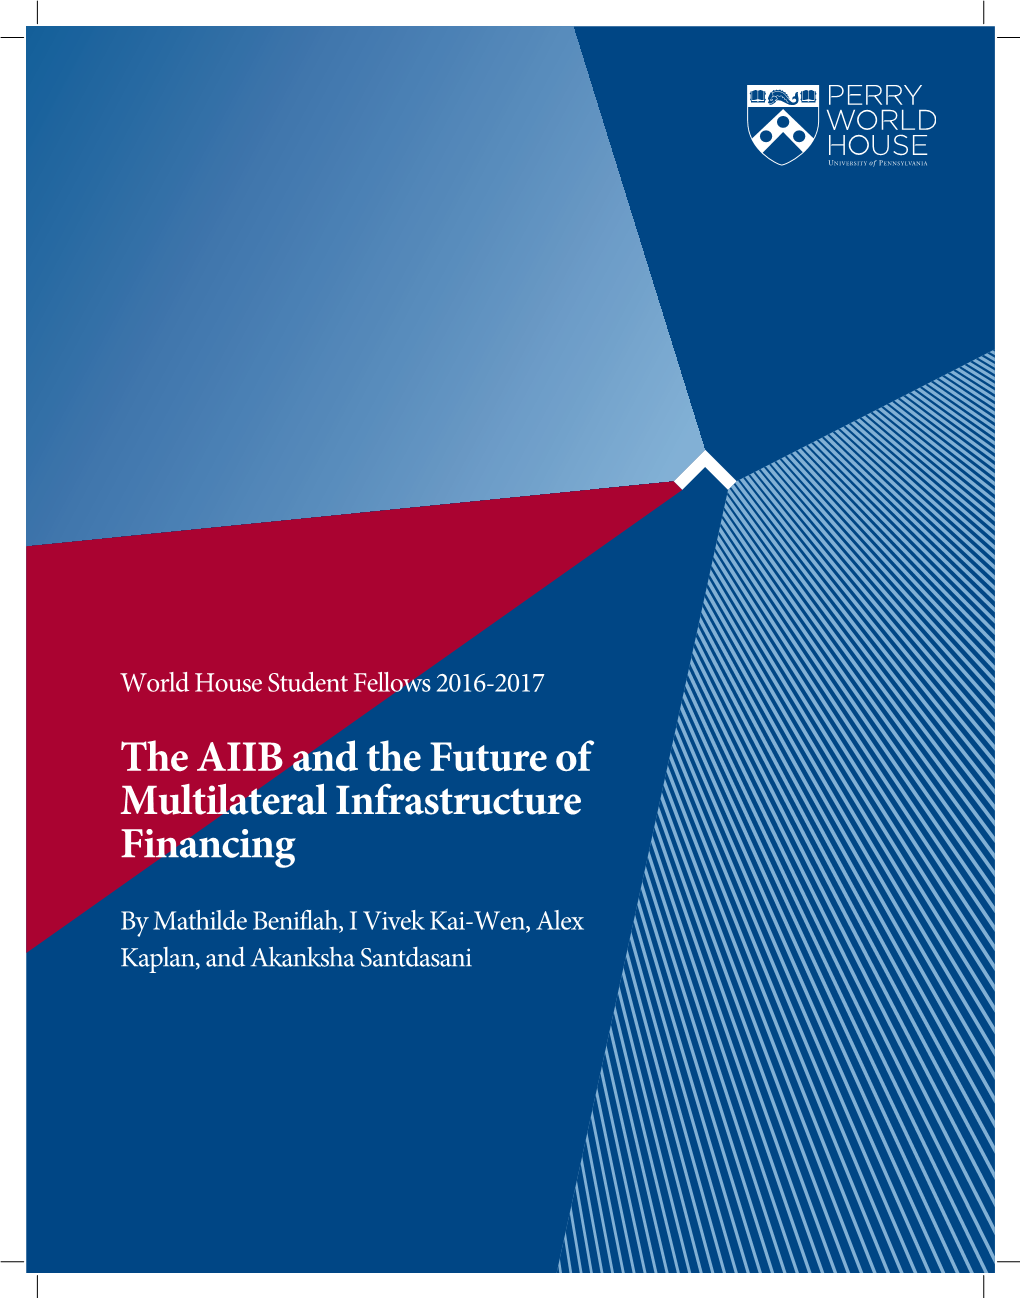 The AIIB and the Future of Multilateral Infrastructure Financing